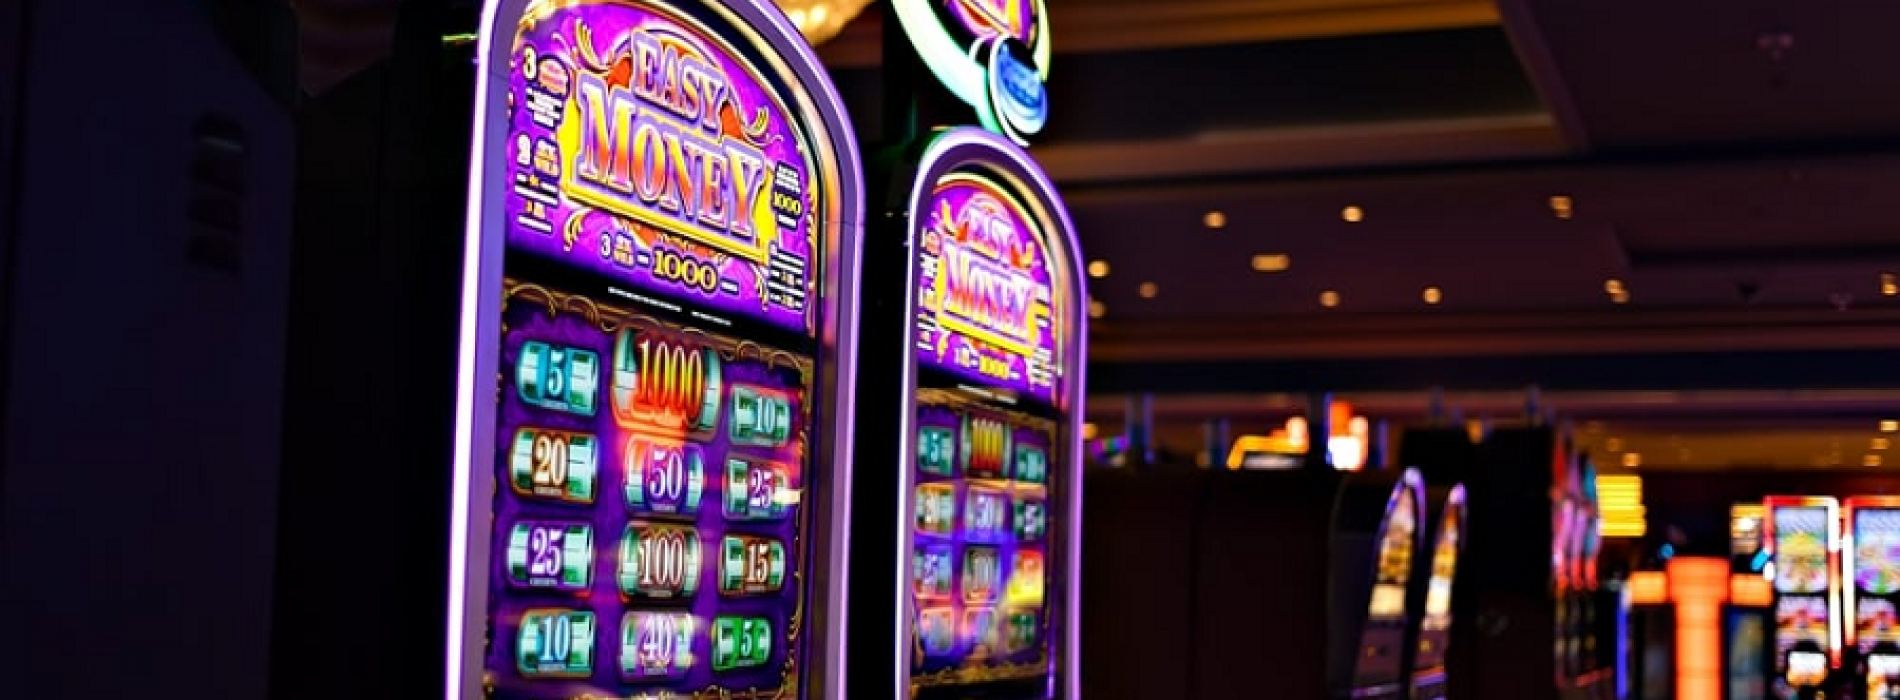 Slot Online – What Are The Different Types of Slot Games?